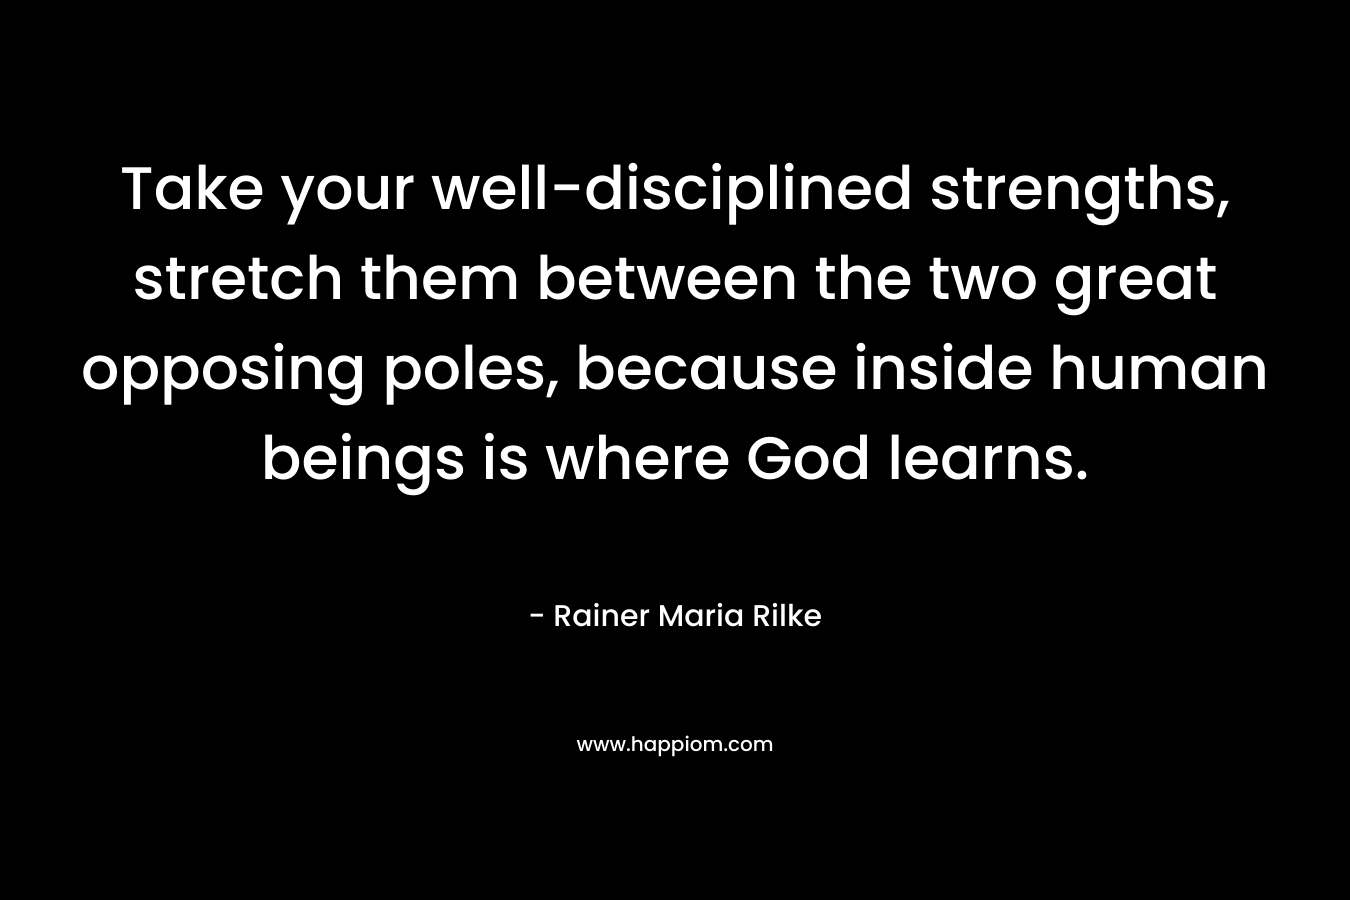 Take your well-disciplined strengths, stretch them between the two great opposing poles, because inside human beings is where God learns.